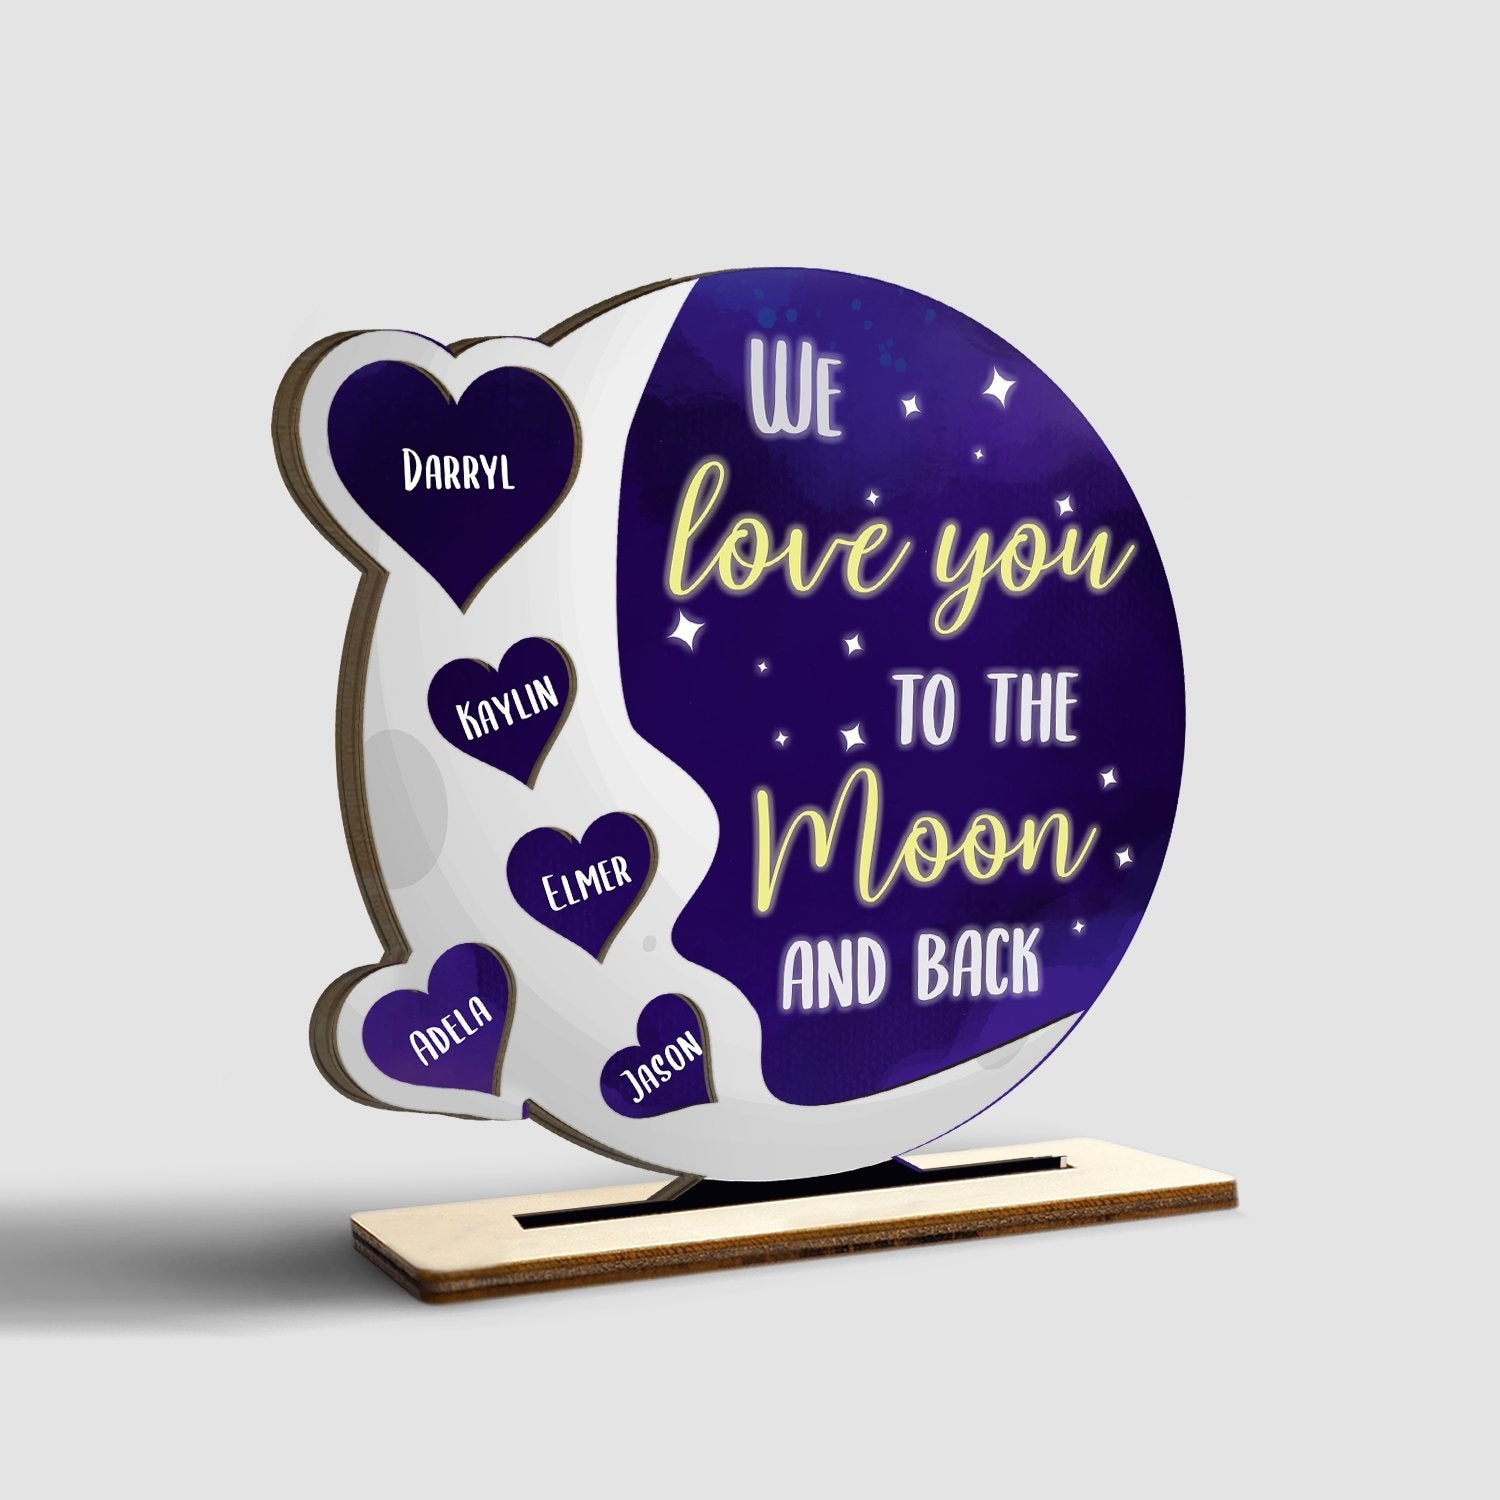 We Love You To The Moon And Back Back, Wooden Plaque 3 Layers